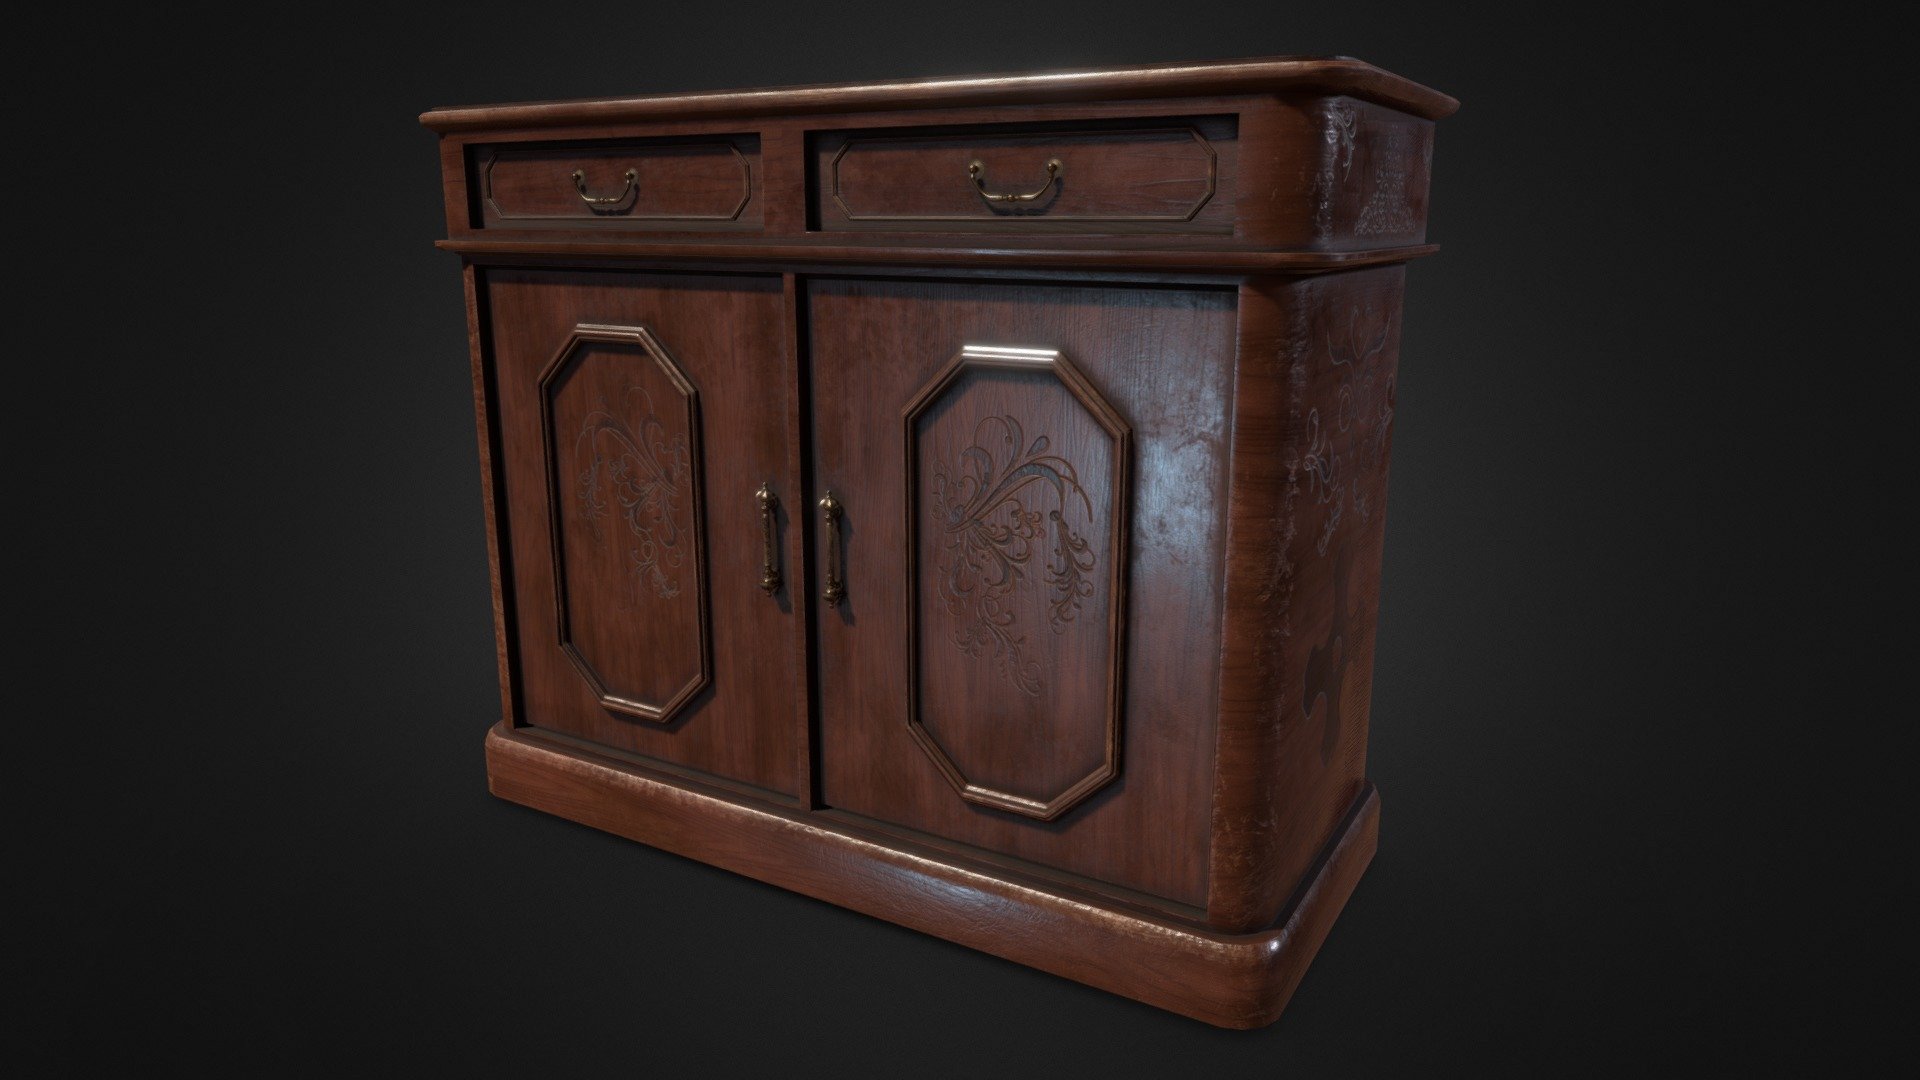 This is a wooden bureau 3d model made for old houses and wooden deocrated environments, made with blender and textured in substance painter, hope you like it! - Wooden Bureau 3D Model - 3D model by IPfuentes 3d model